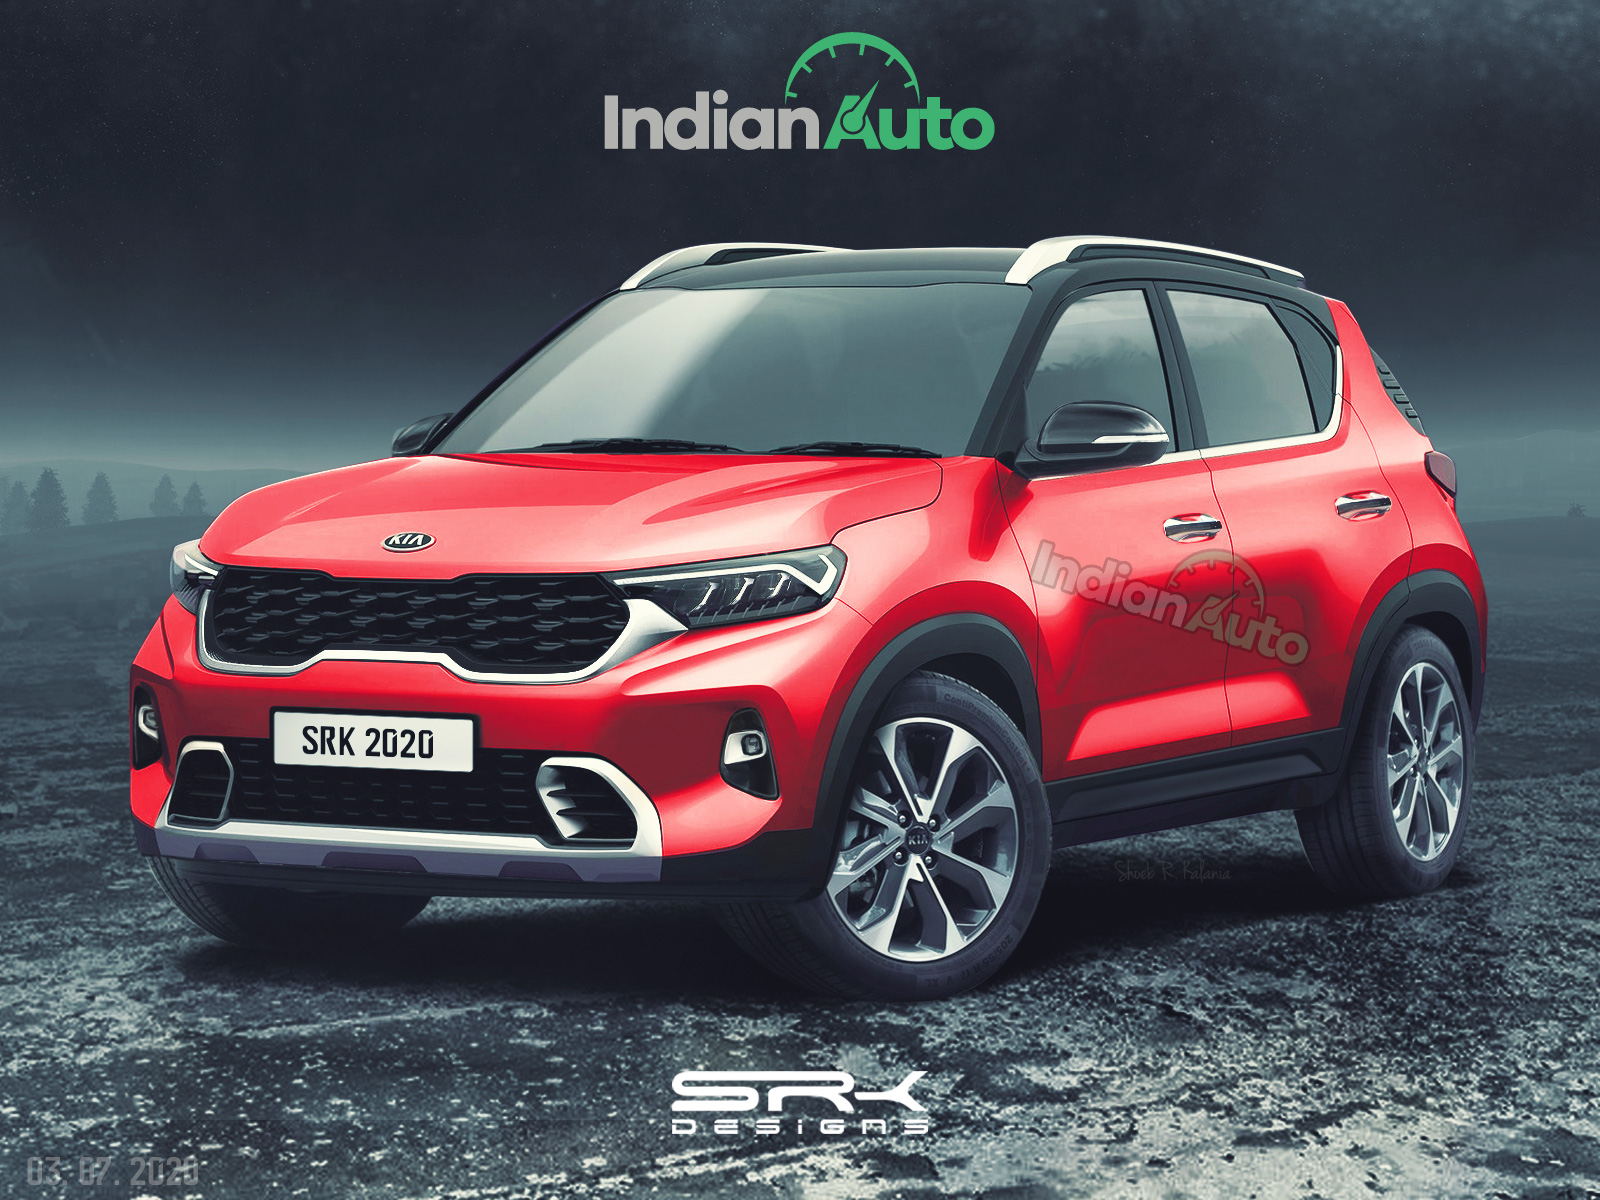 Production Ready Kia So Looks Killer In This Life Like Render